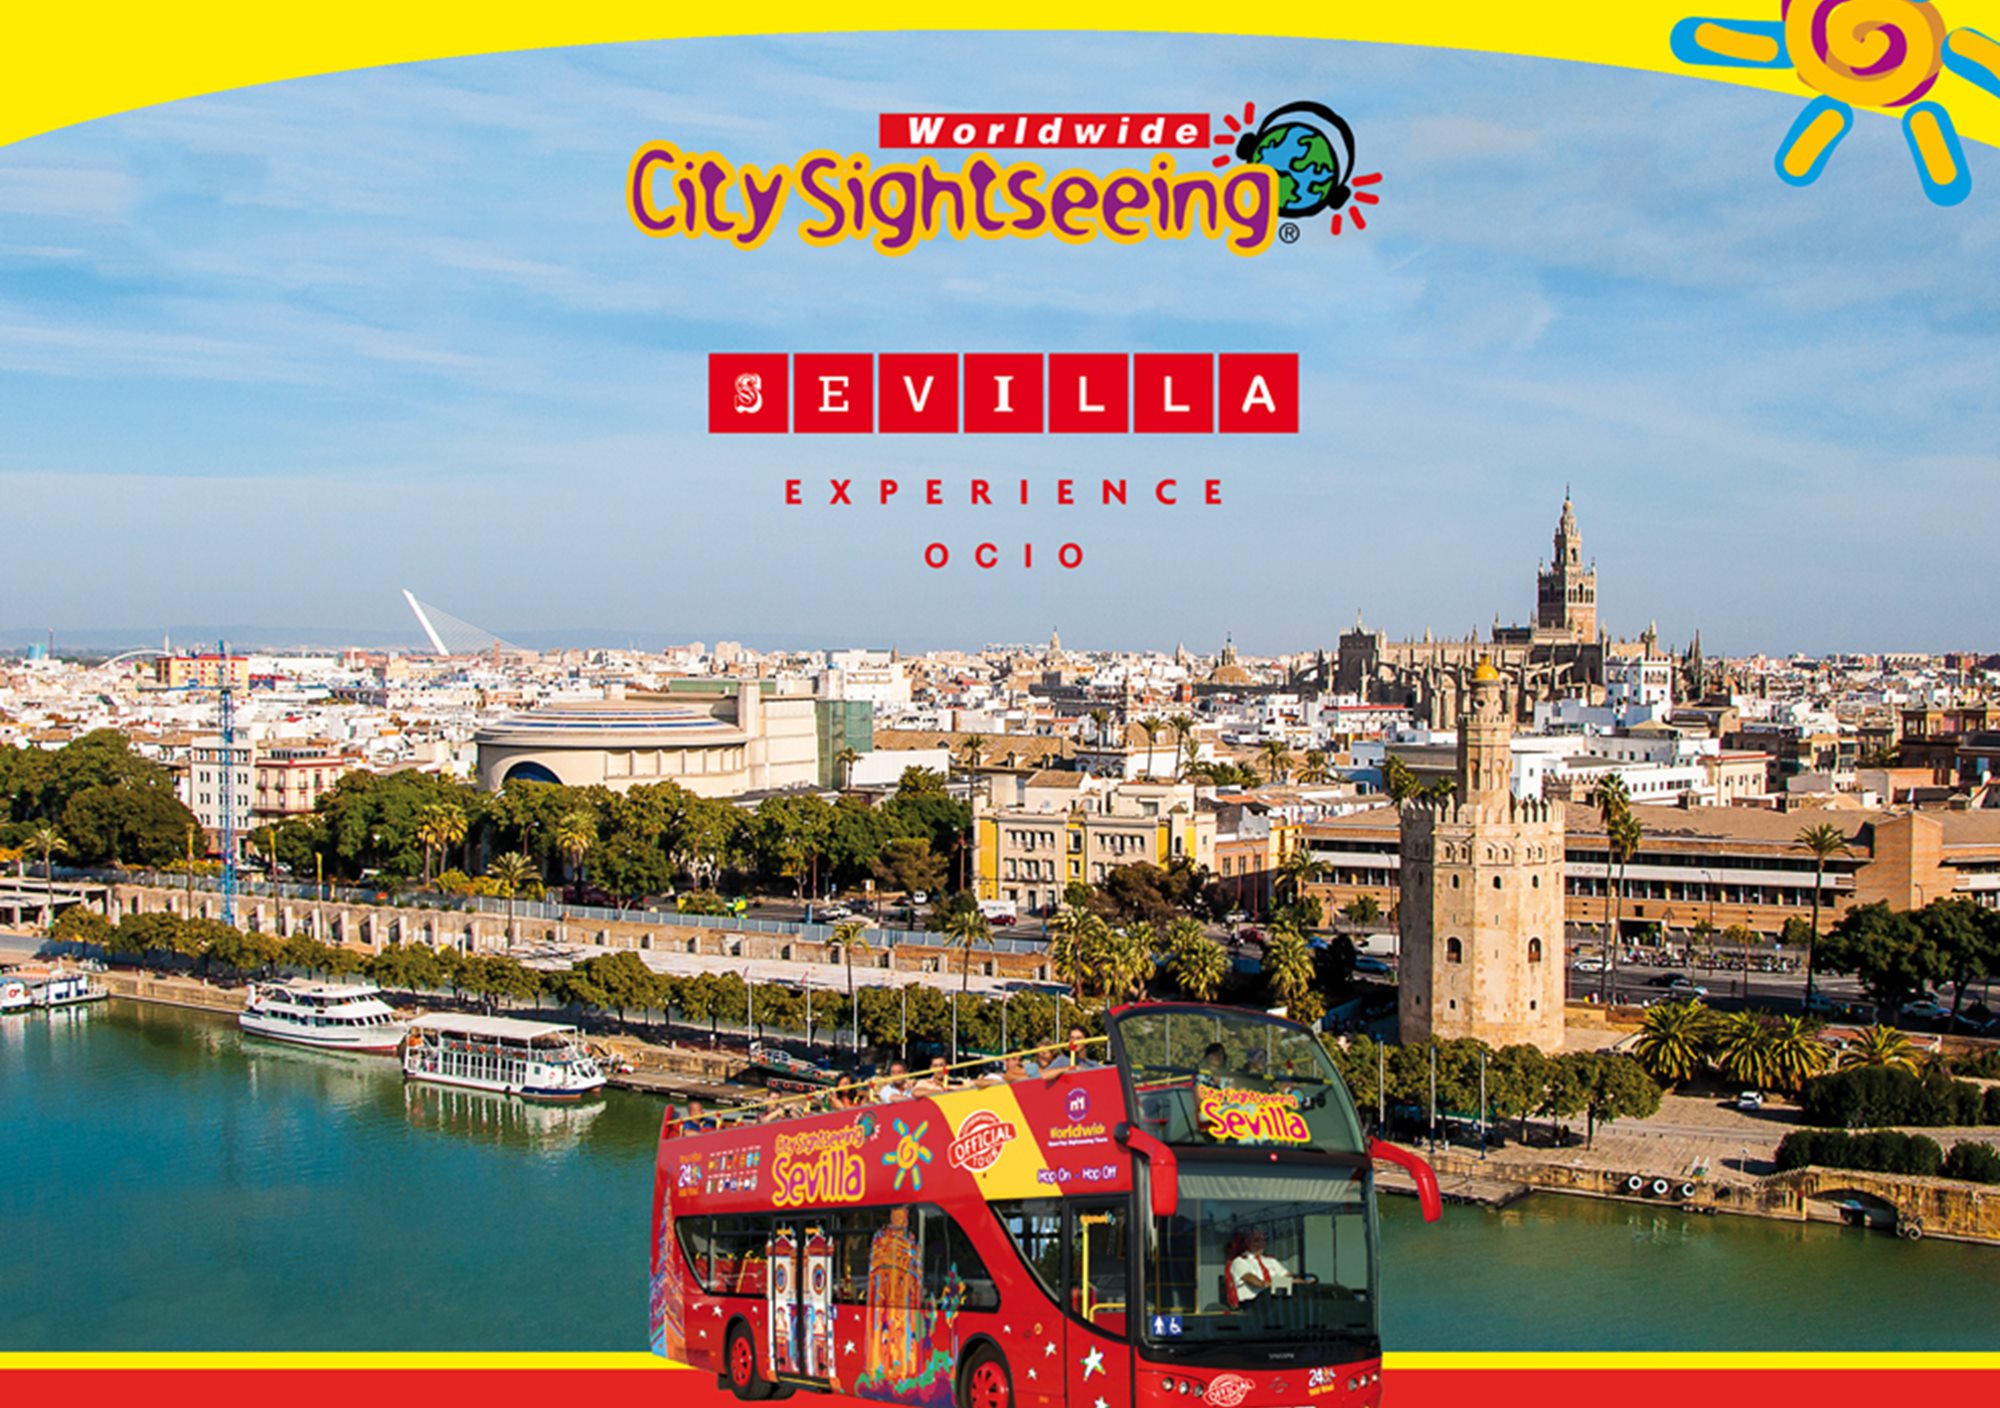 booking tickets online get purchase City Pass Sightseeing Sevilla Experience